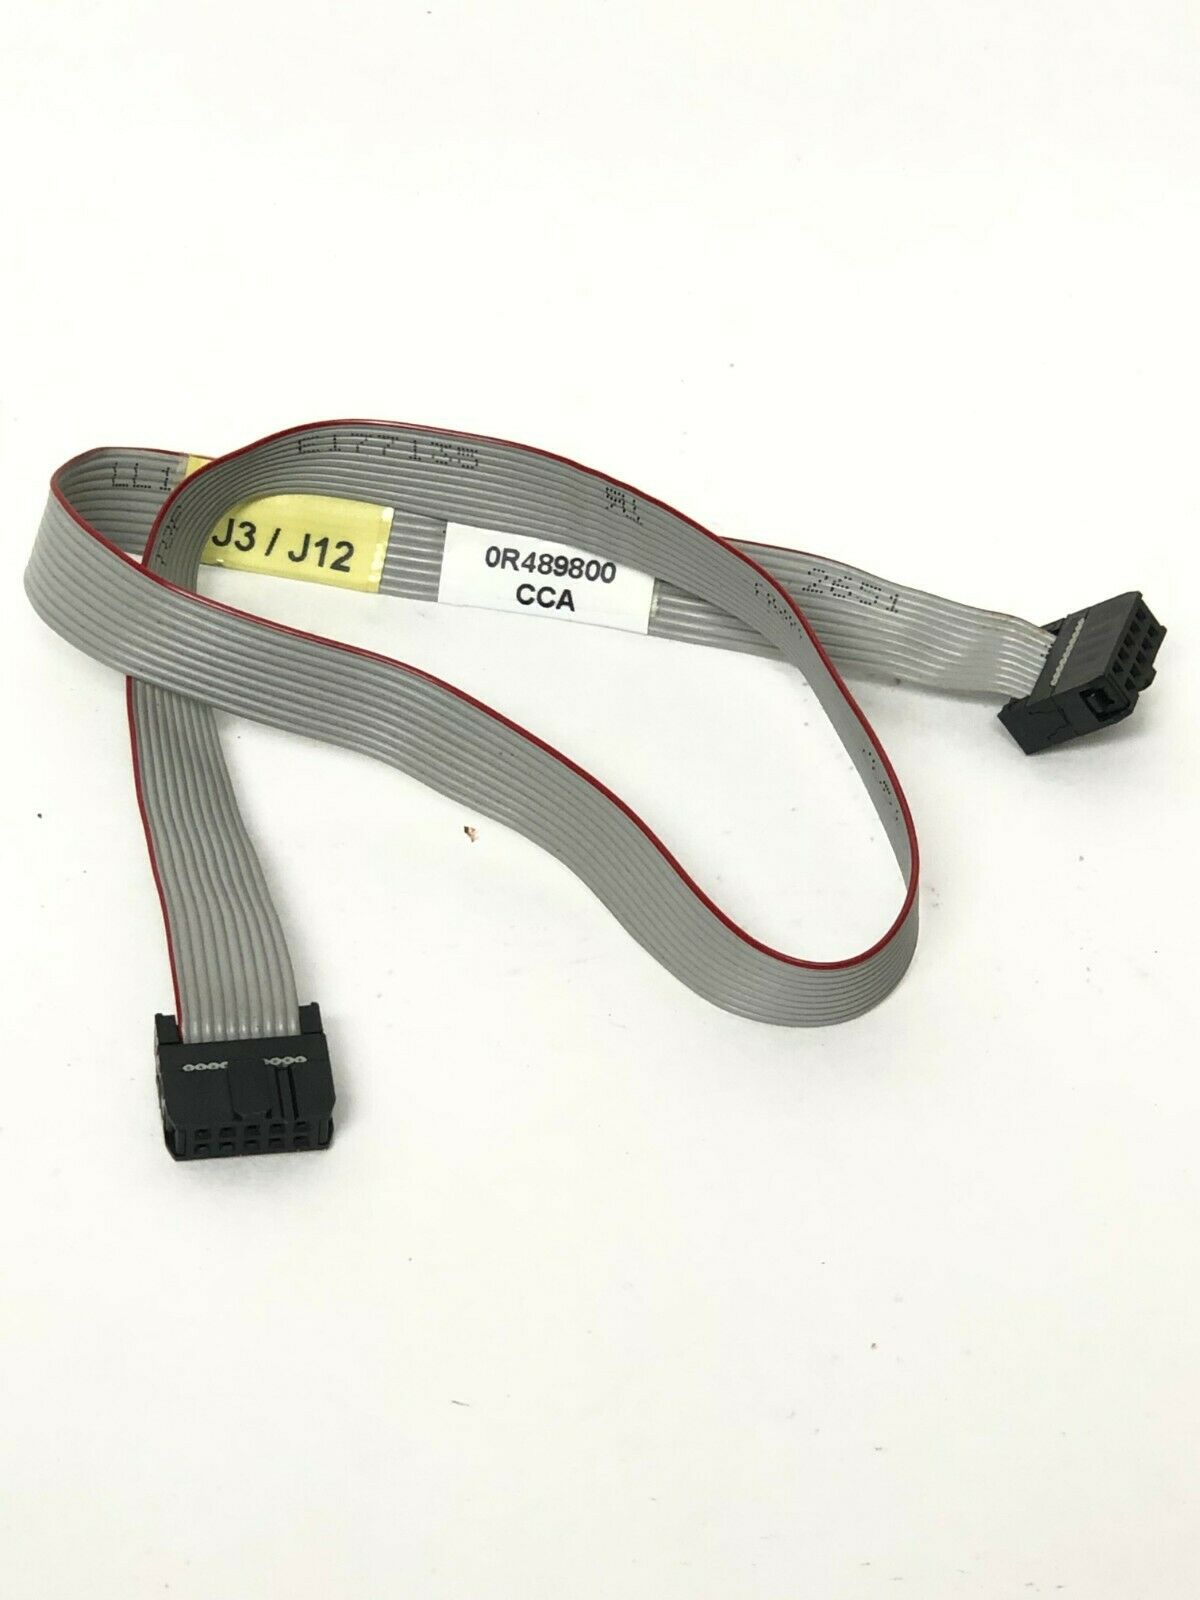 True Fitness CS6.0 CS8.0 Treadmill FISP Console Cable Wire Harness 0R489800 (Used)